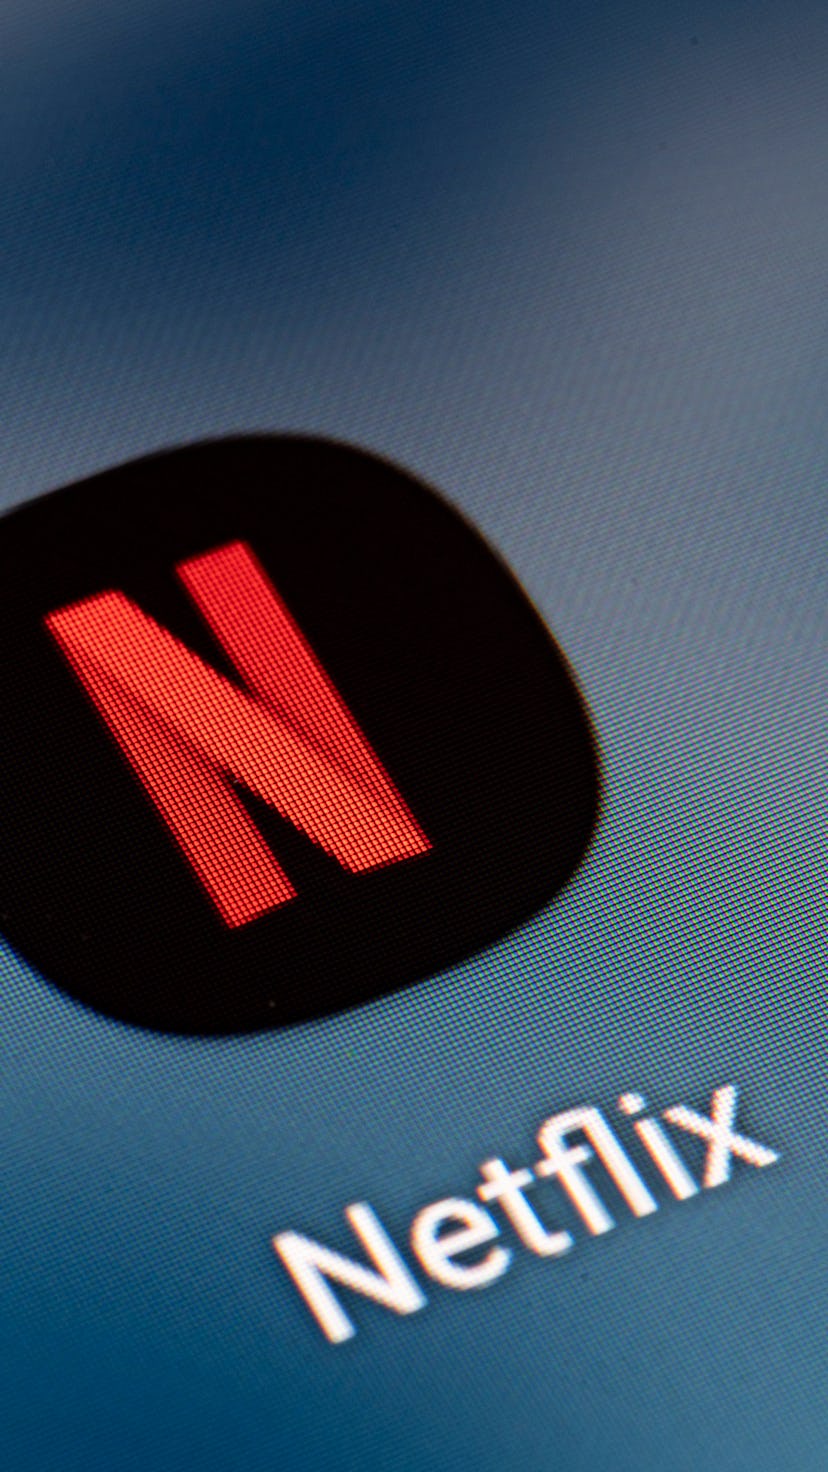 Netflix users are not responding well to the streaming service announcing plans to add ads.